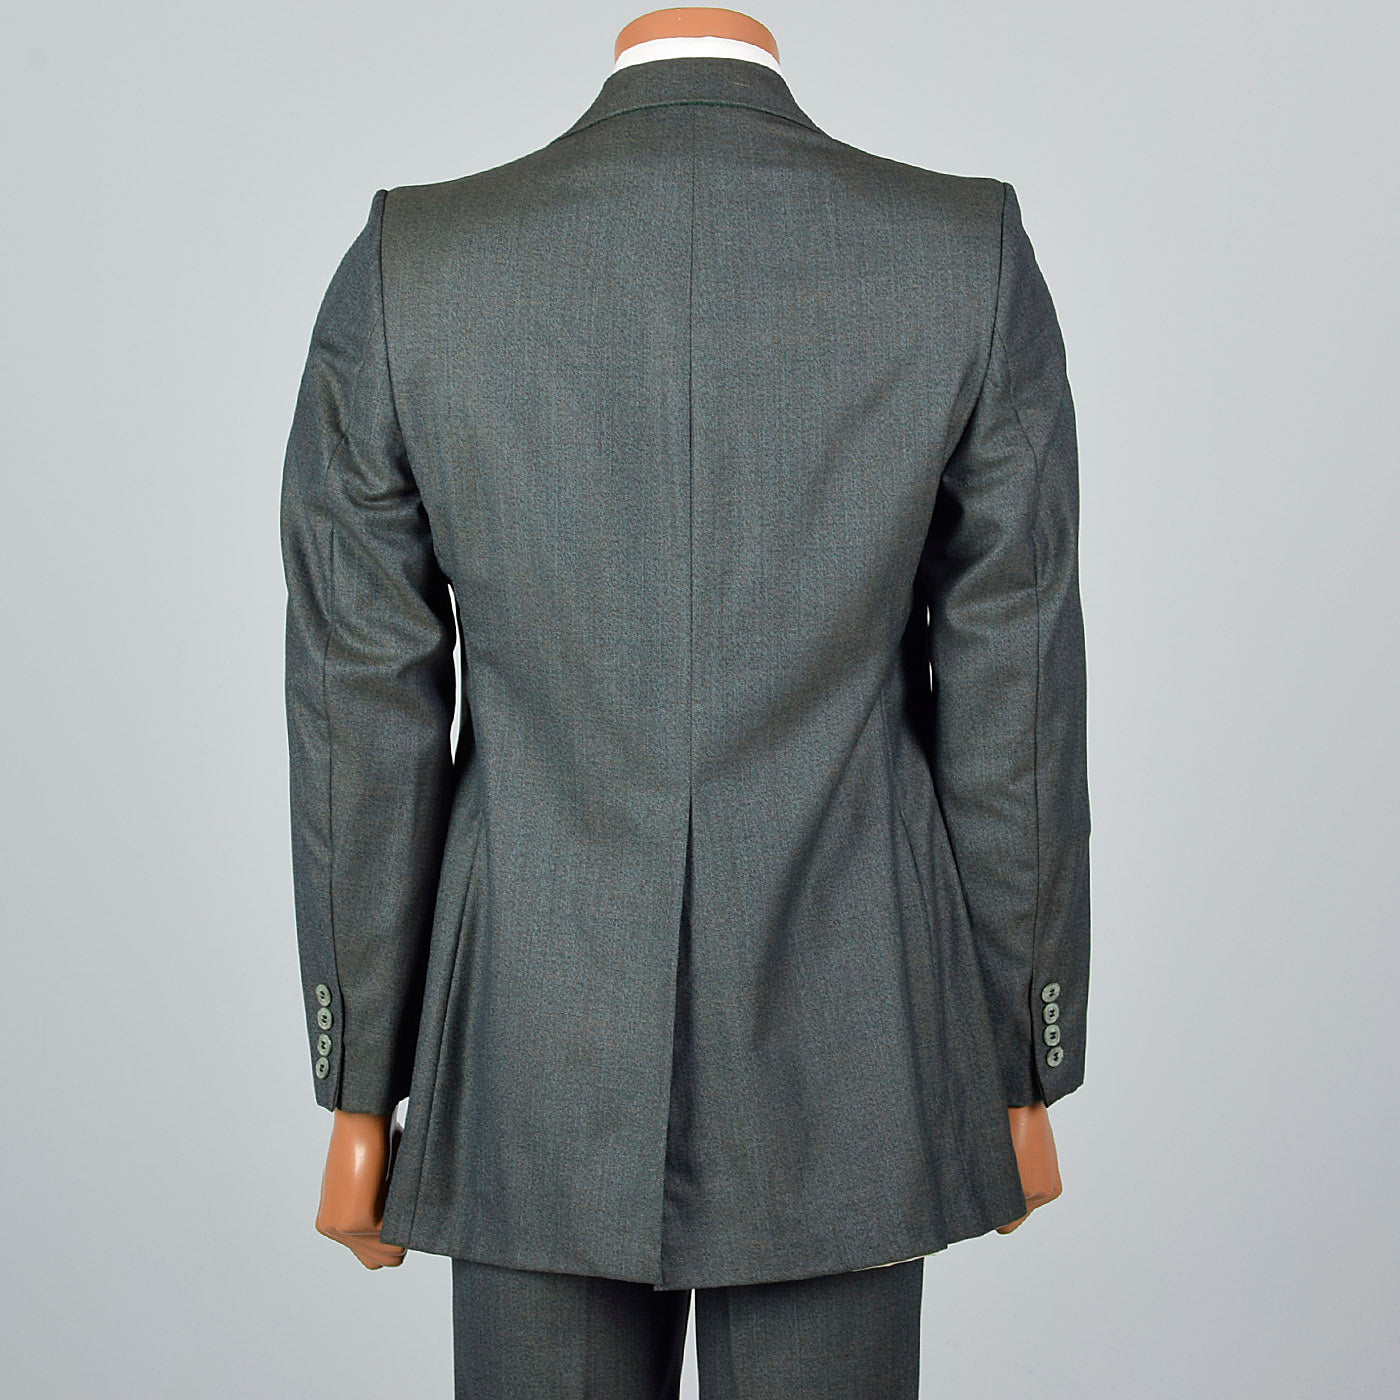 1970s Mens Three Piece Suit in Green